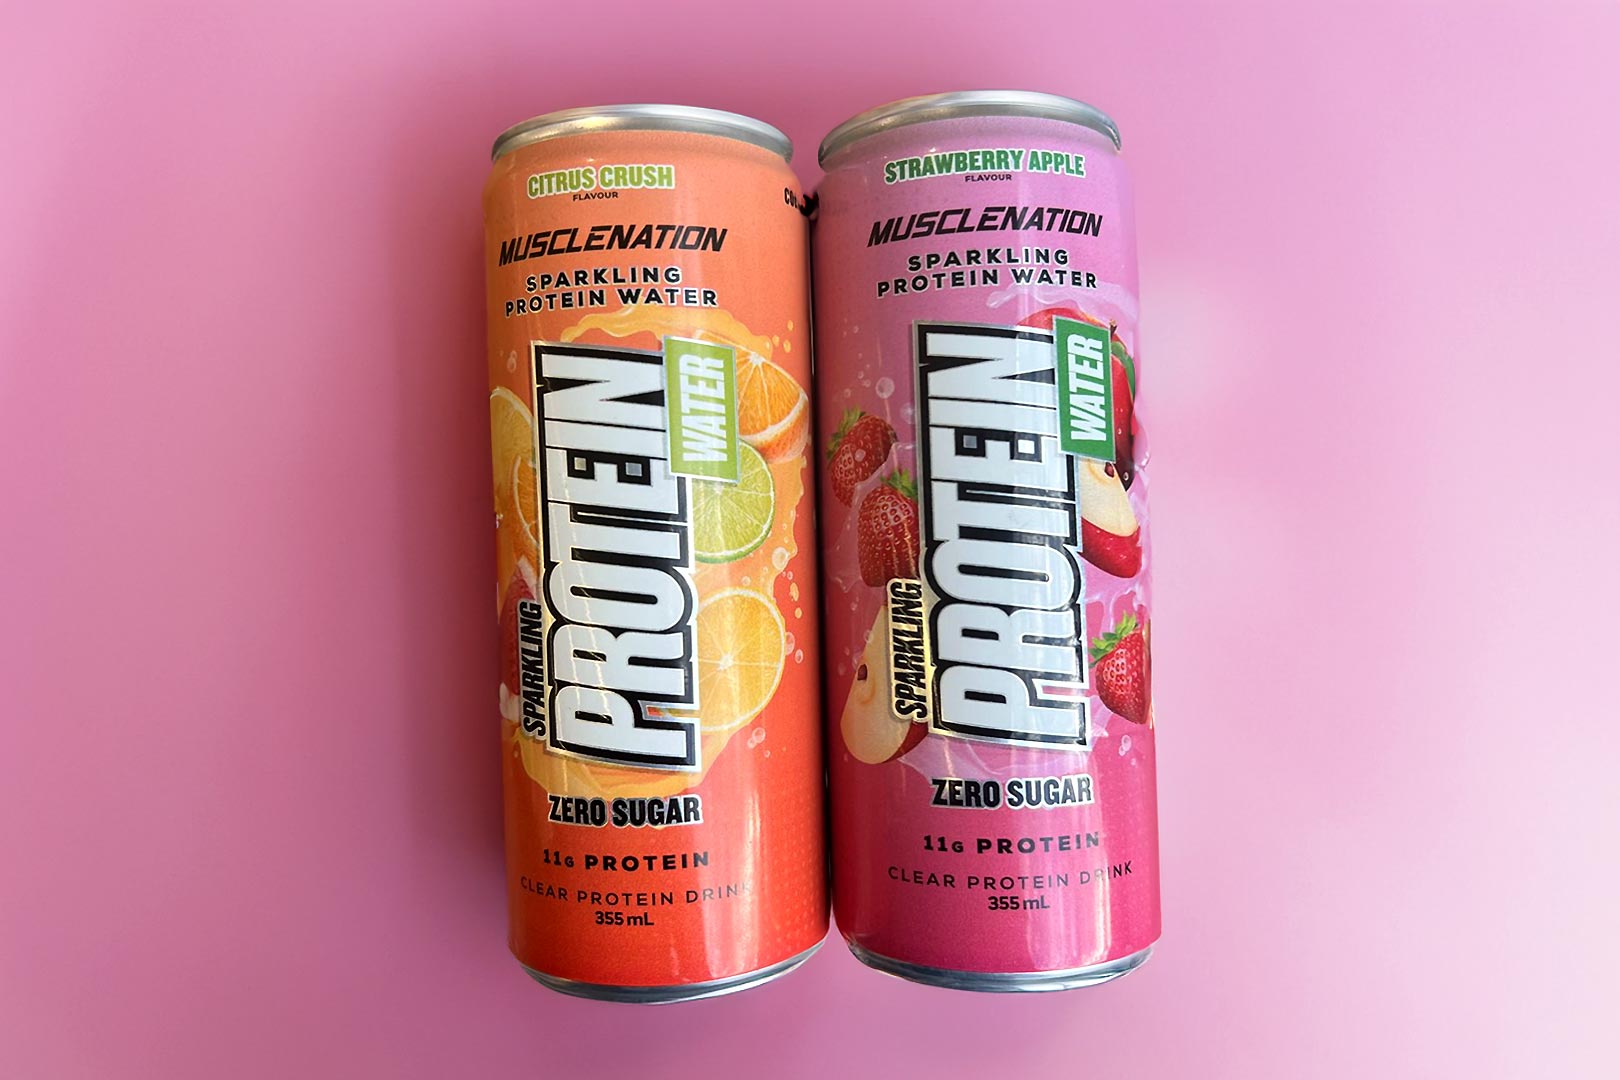 Muscle Nation Announces Sparkling Protein Water